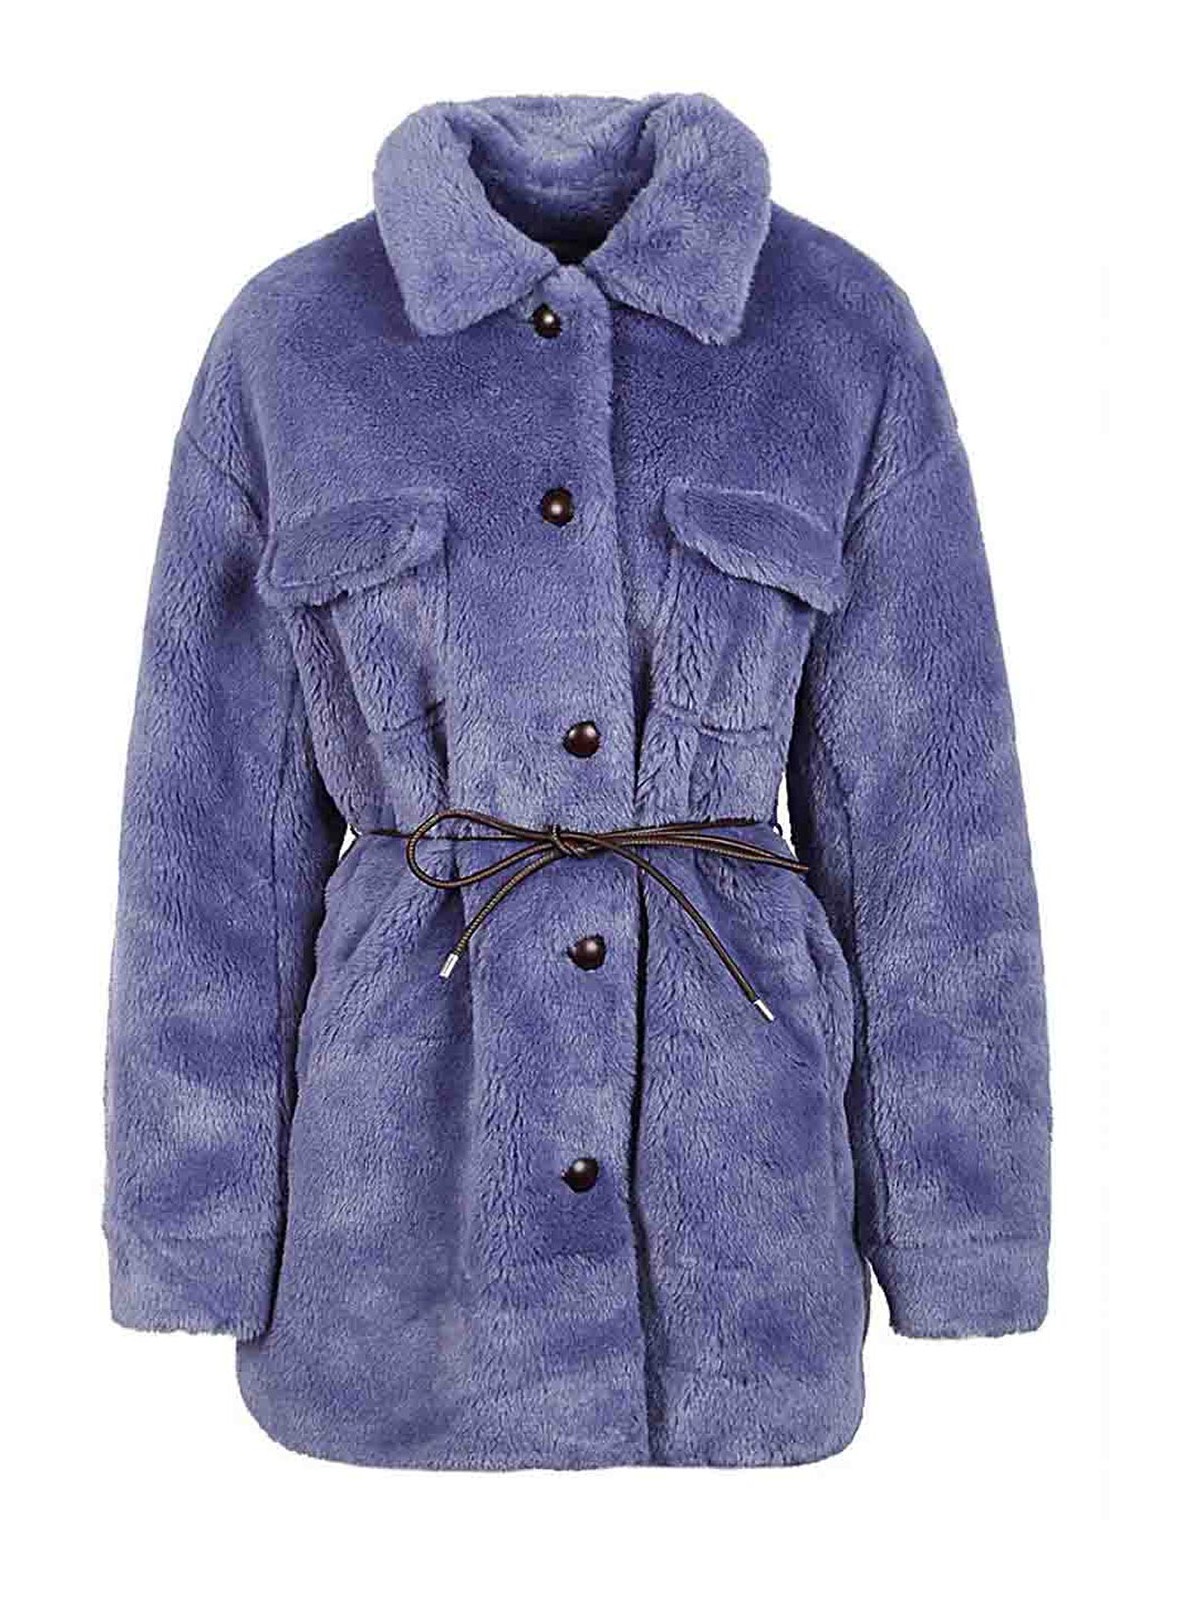 P.A.R.O.S.H. double-breasted wool coat - Purple